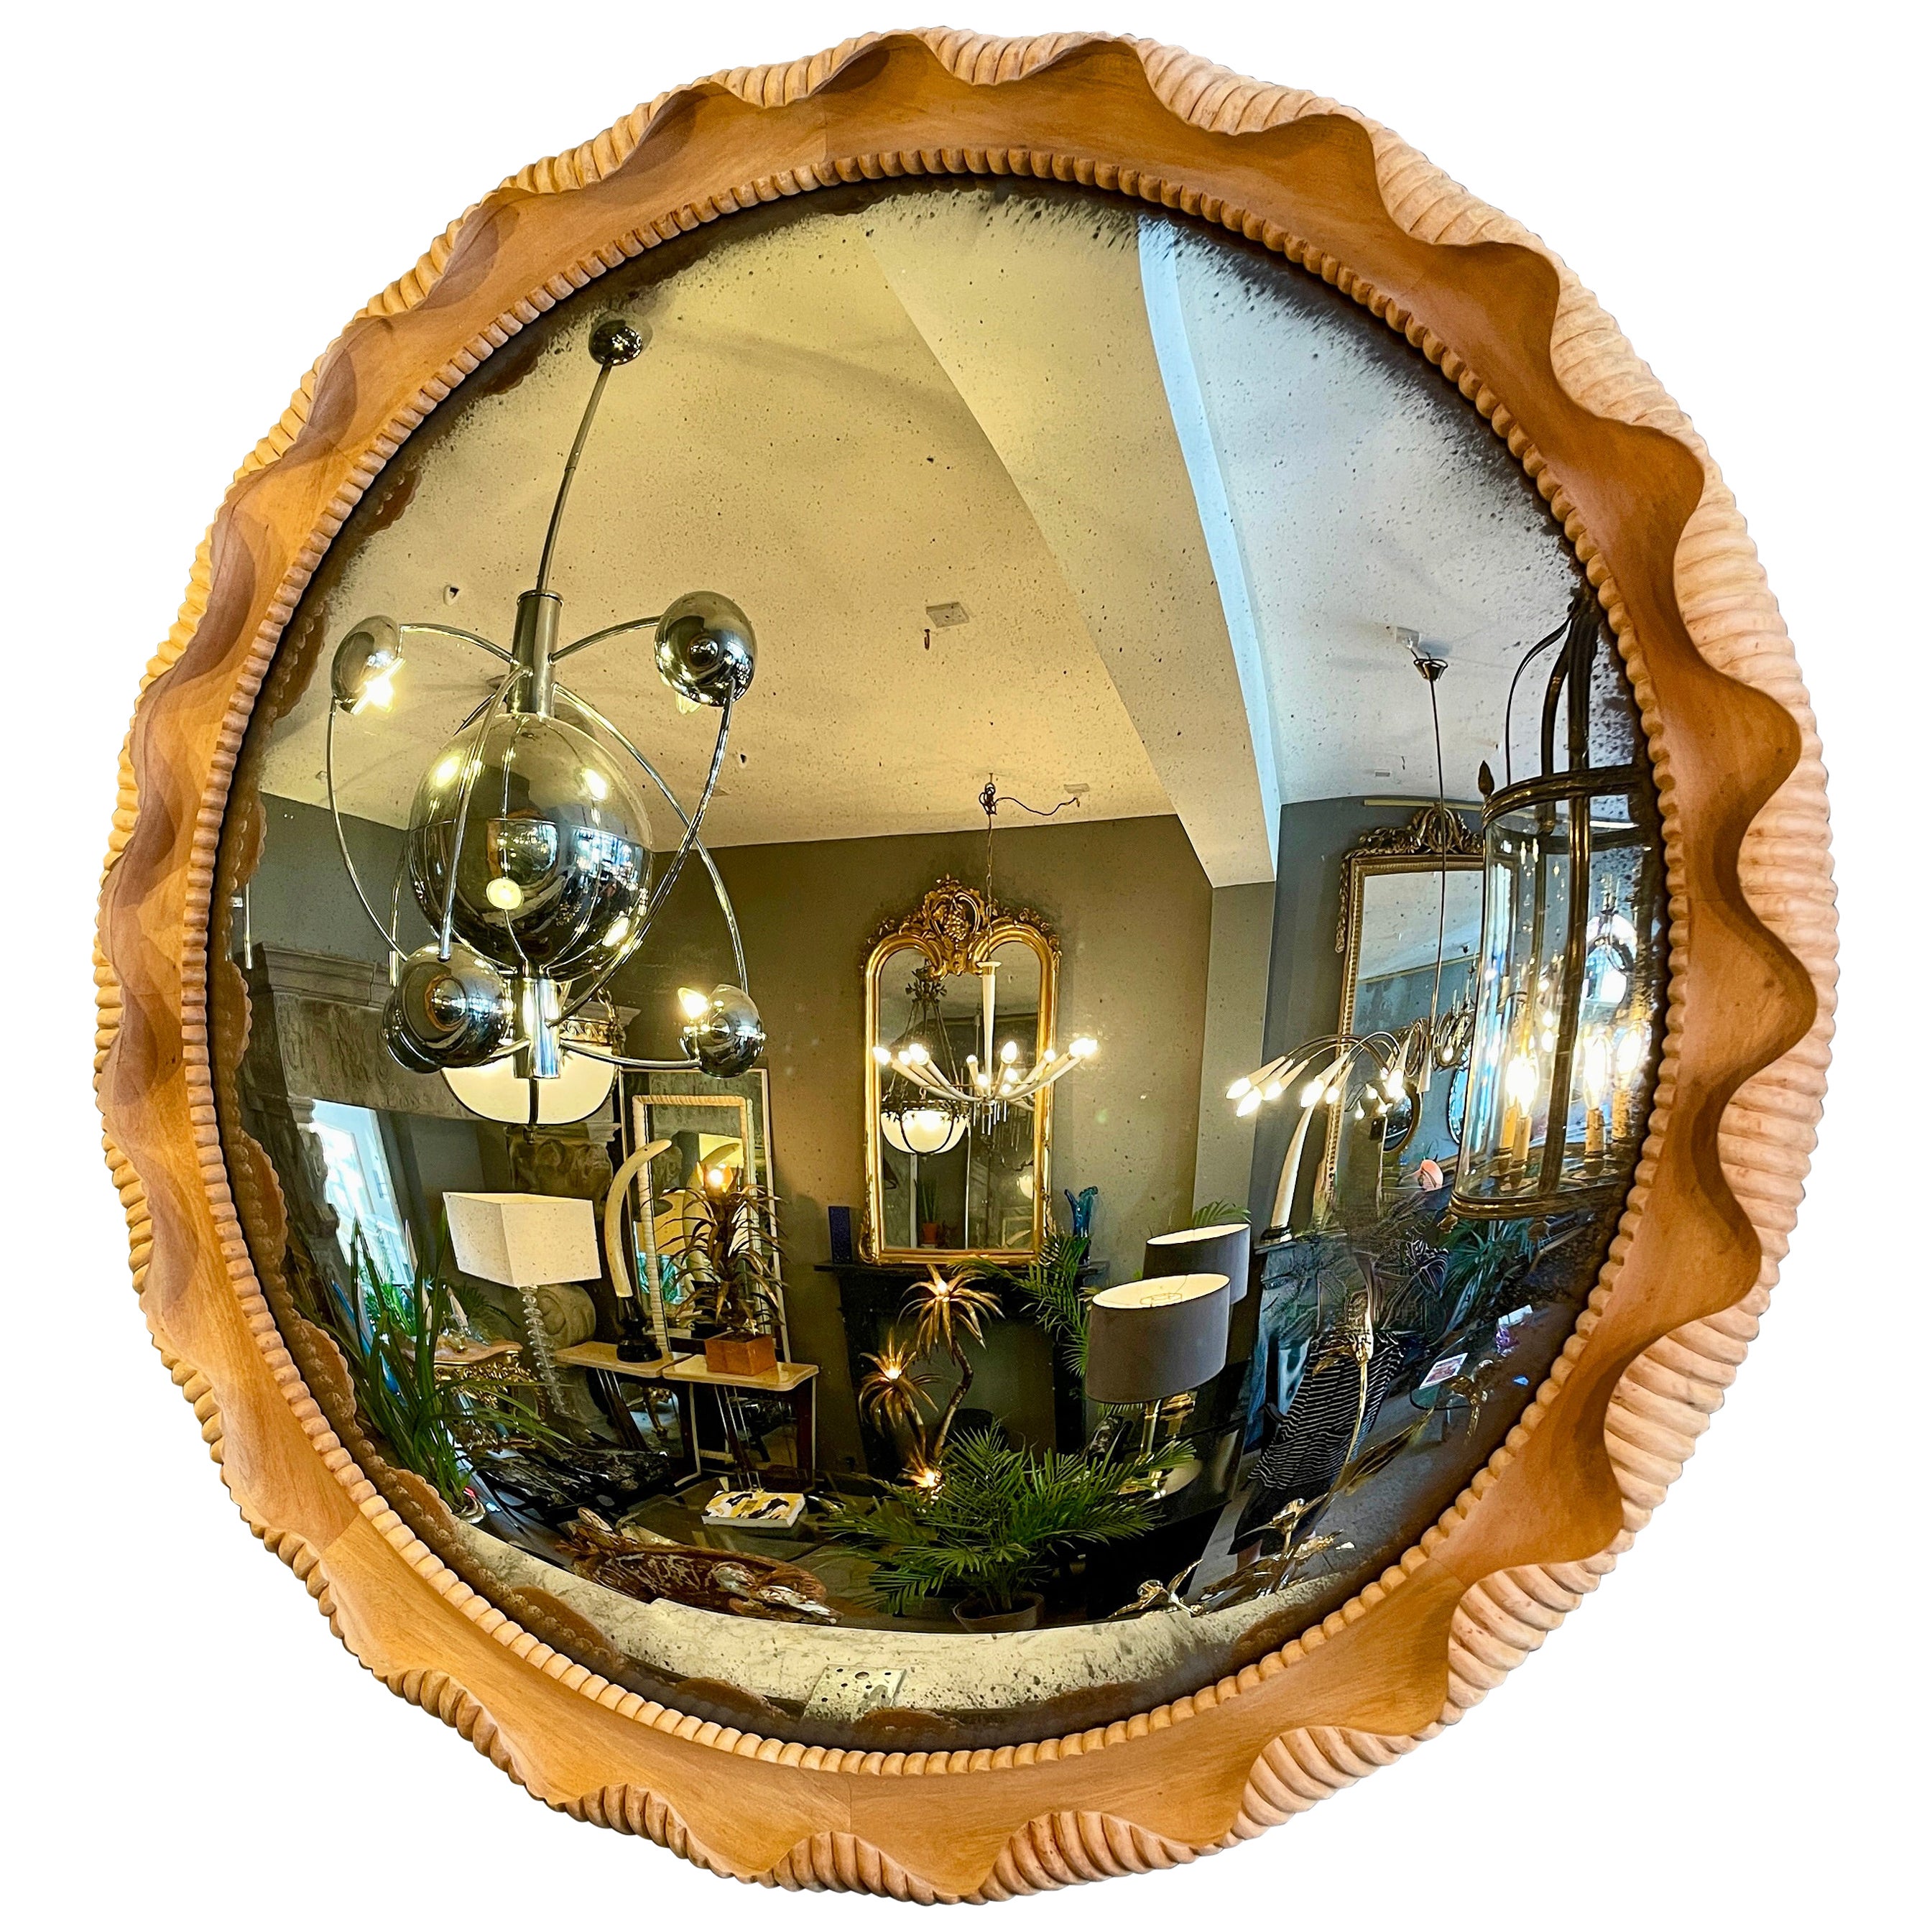 A large Distressed Convex Mirror Within a Carved Oak Frame  For Sale